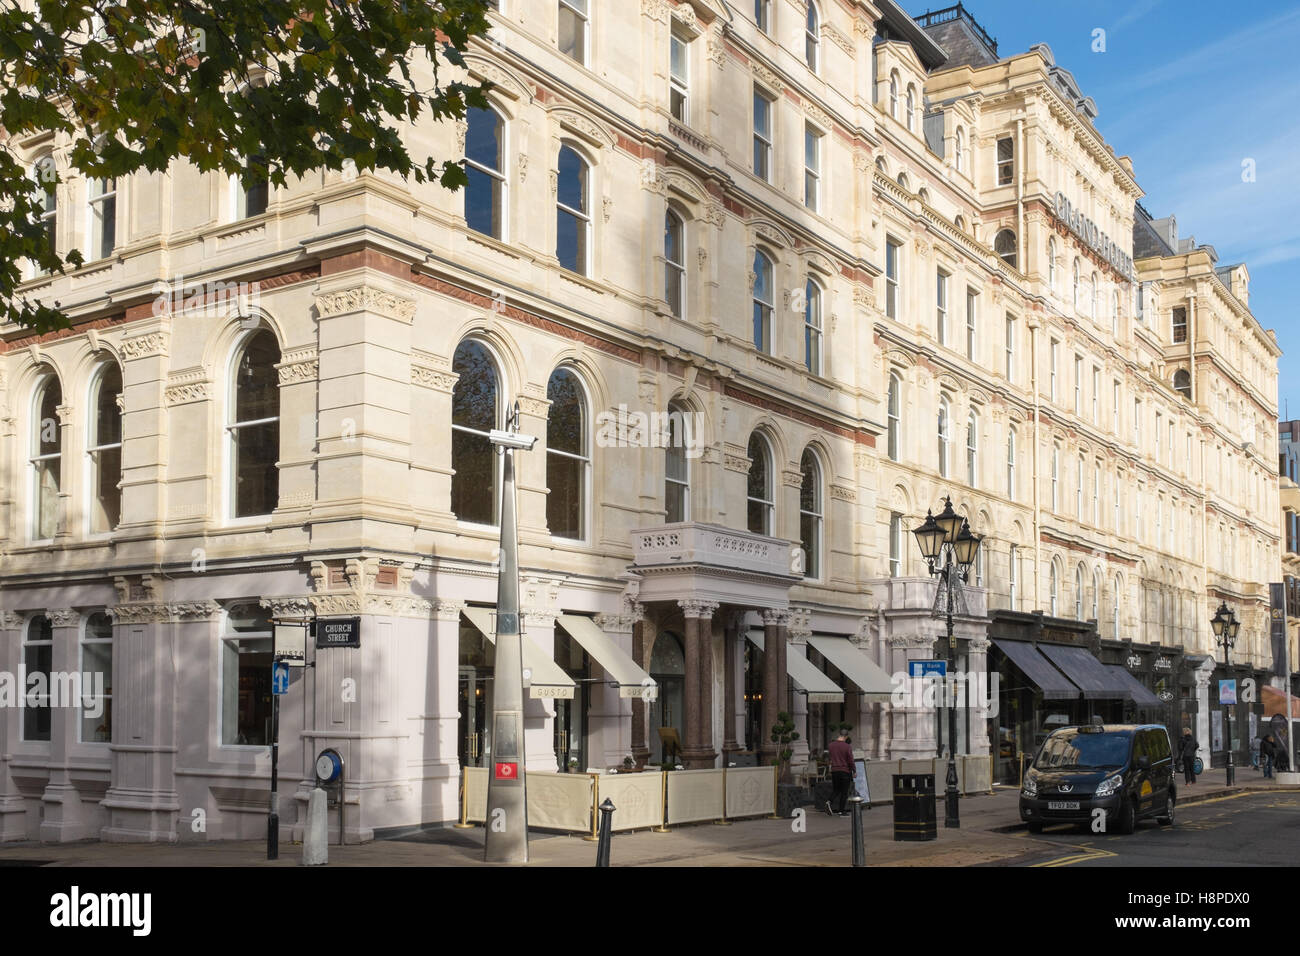 The refurbished Grand Hotel in Colmore Row, Birmingham Stock Photo